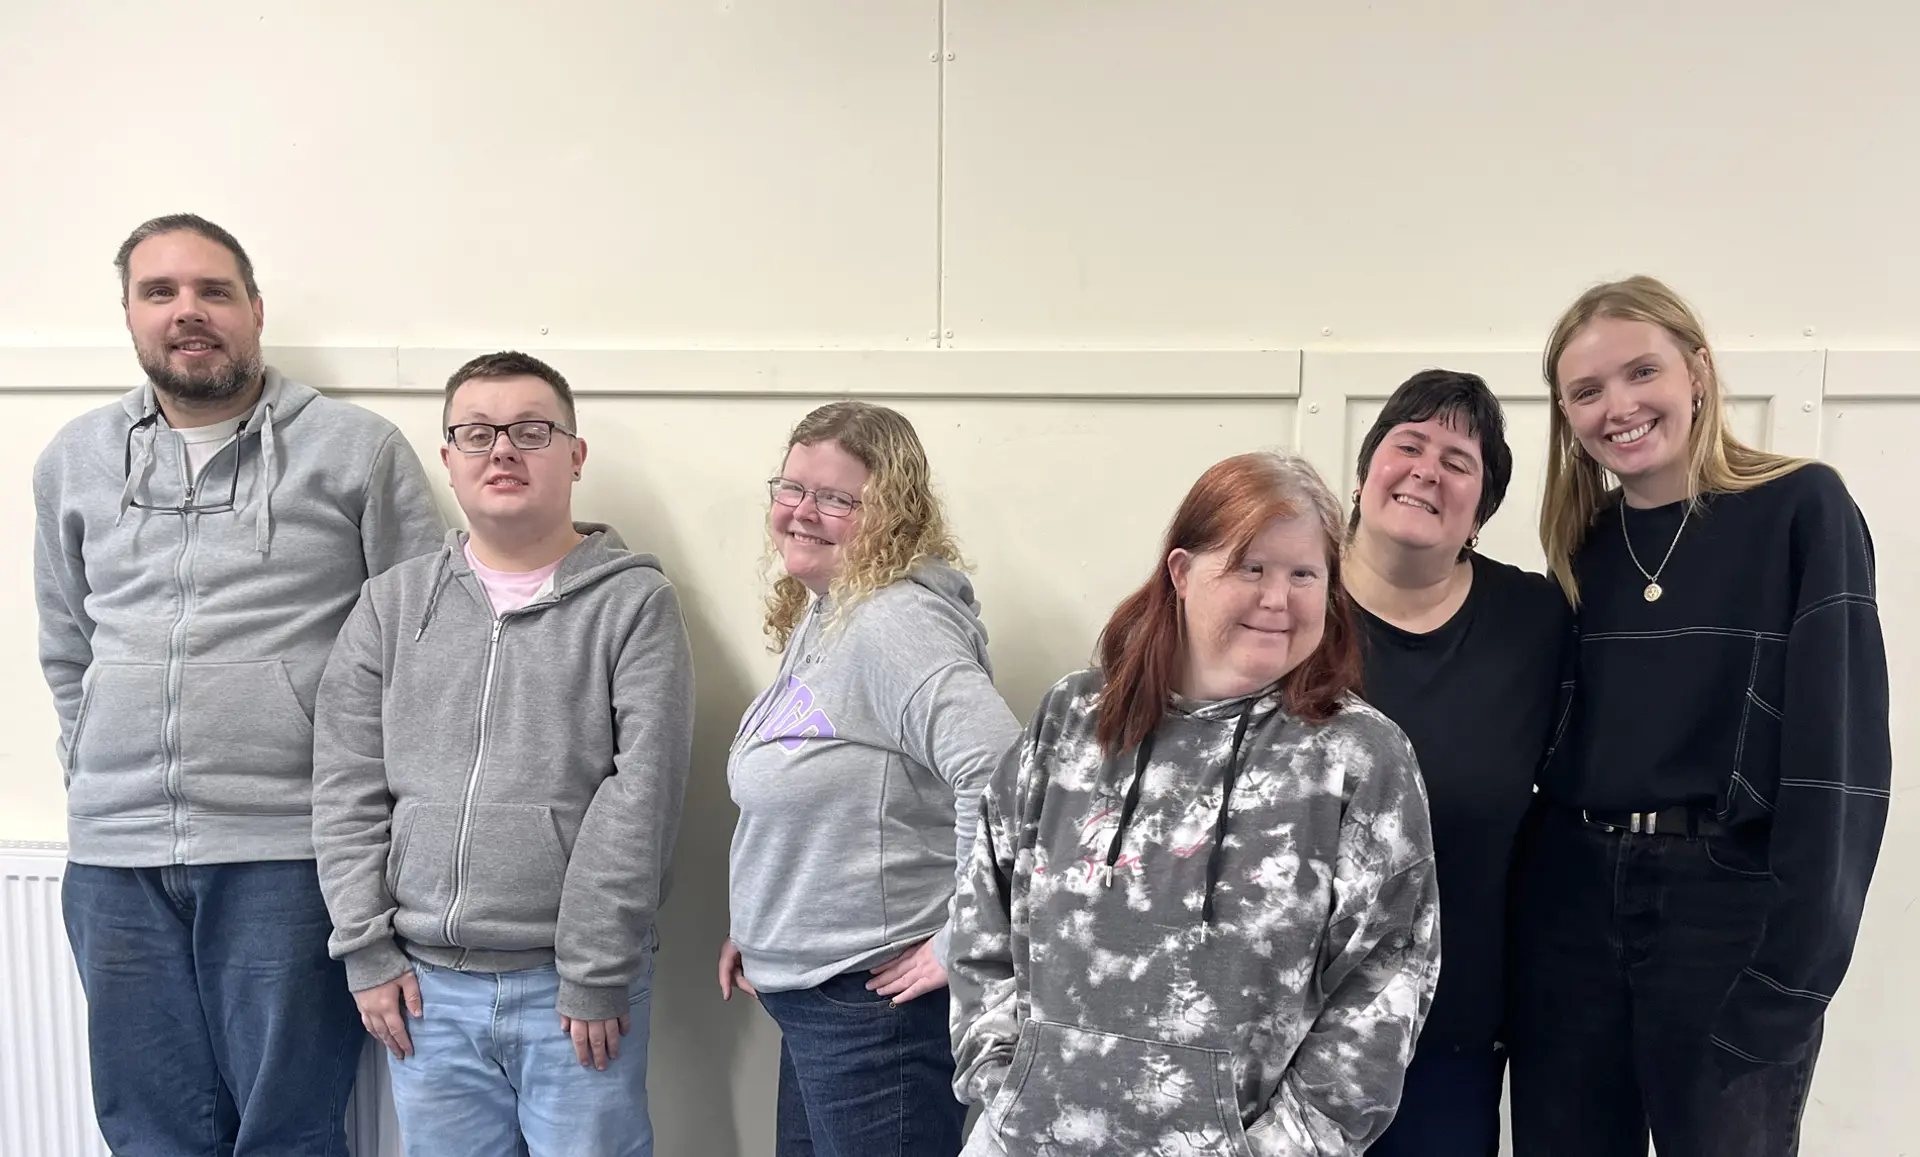 A group photo of the Arbroath pARTicipate group and Lily. They are standing in a line against a cream wall, and are smiling and posing. 